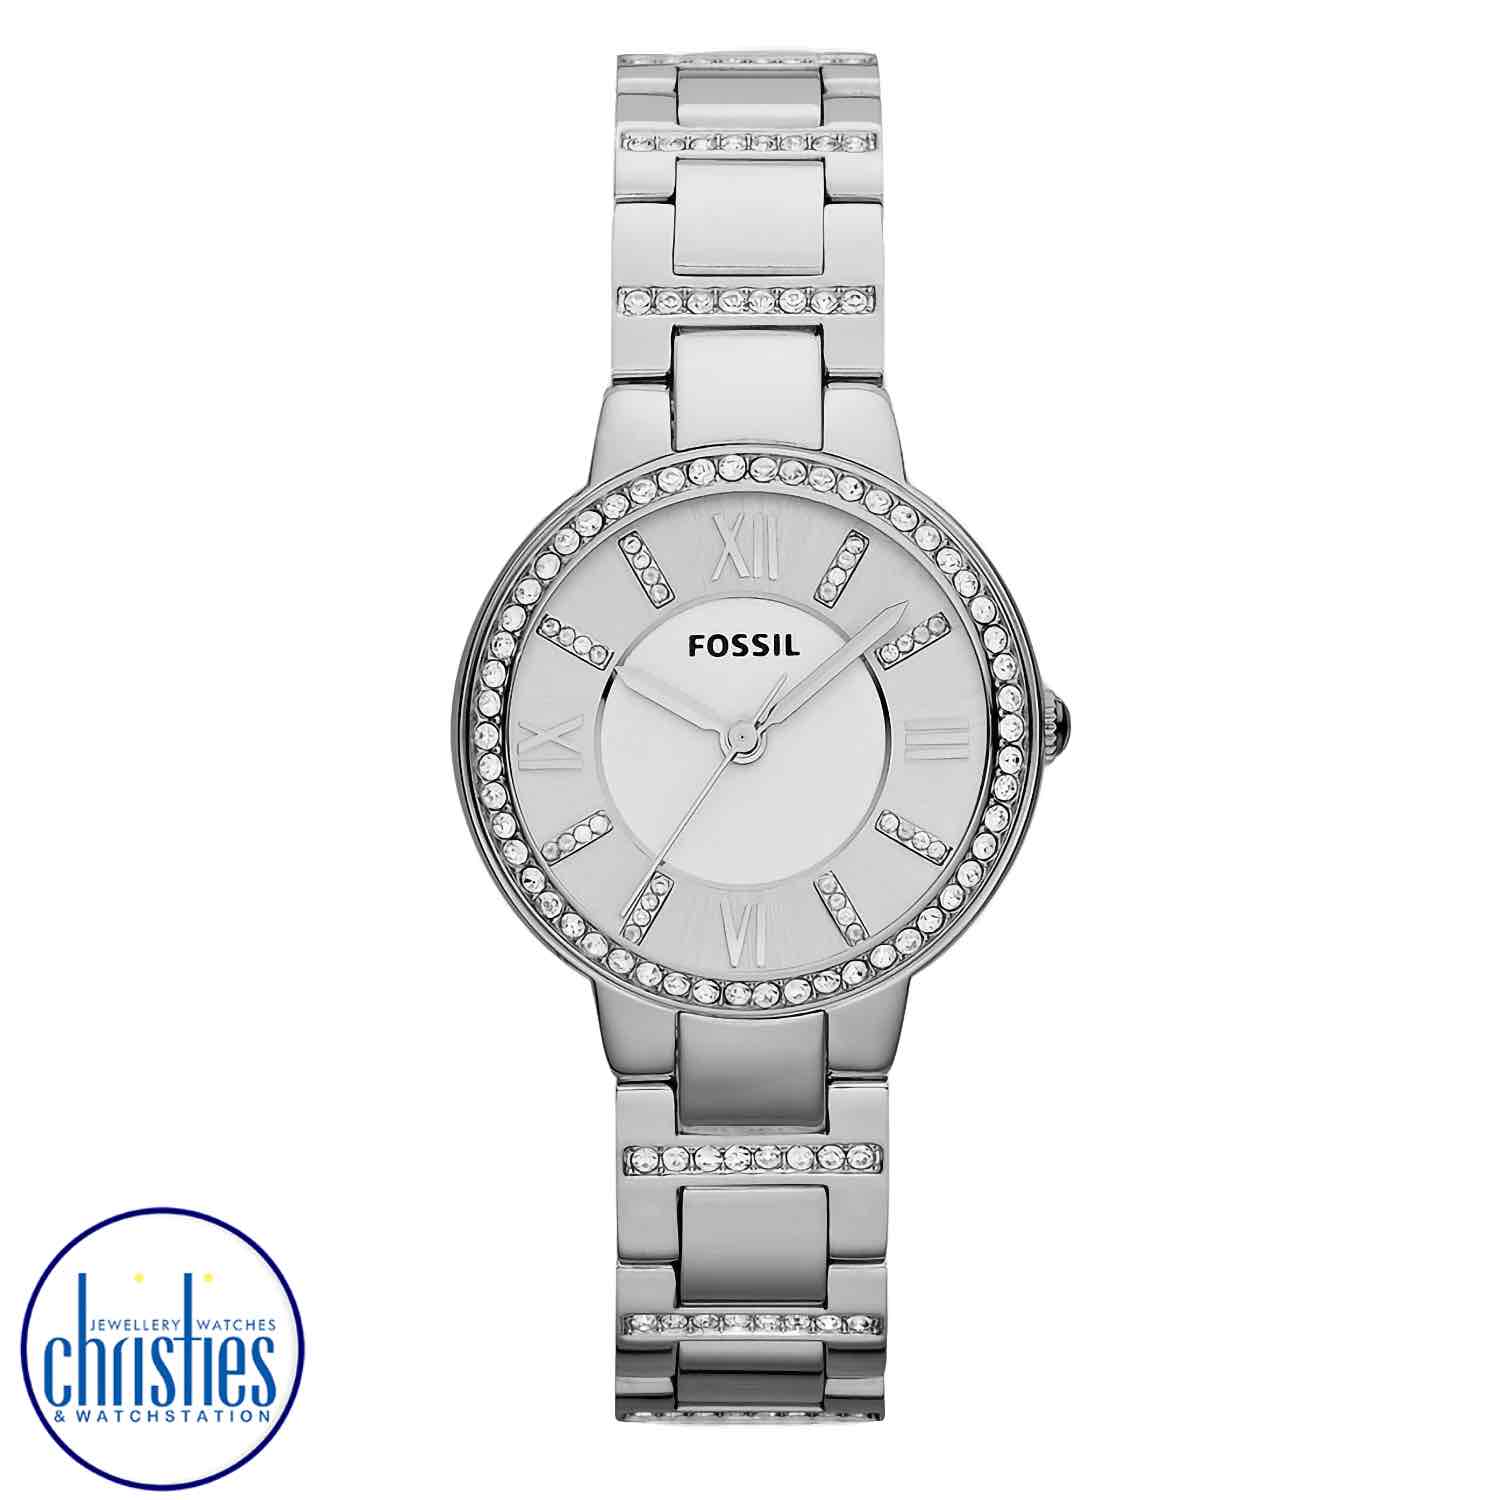 ES3282 Fossil Virginia Stainless Steel Watch. Shiny steel meets dramatic glitz—made for modern sophisticates and vintage enthusiasts alike, you wont be able to live without Fossils ever-chic Virginia. This Virginia watch also features a three hand movemen